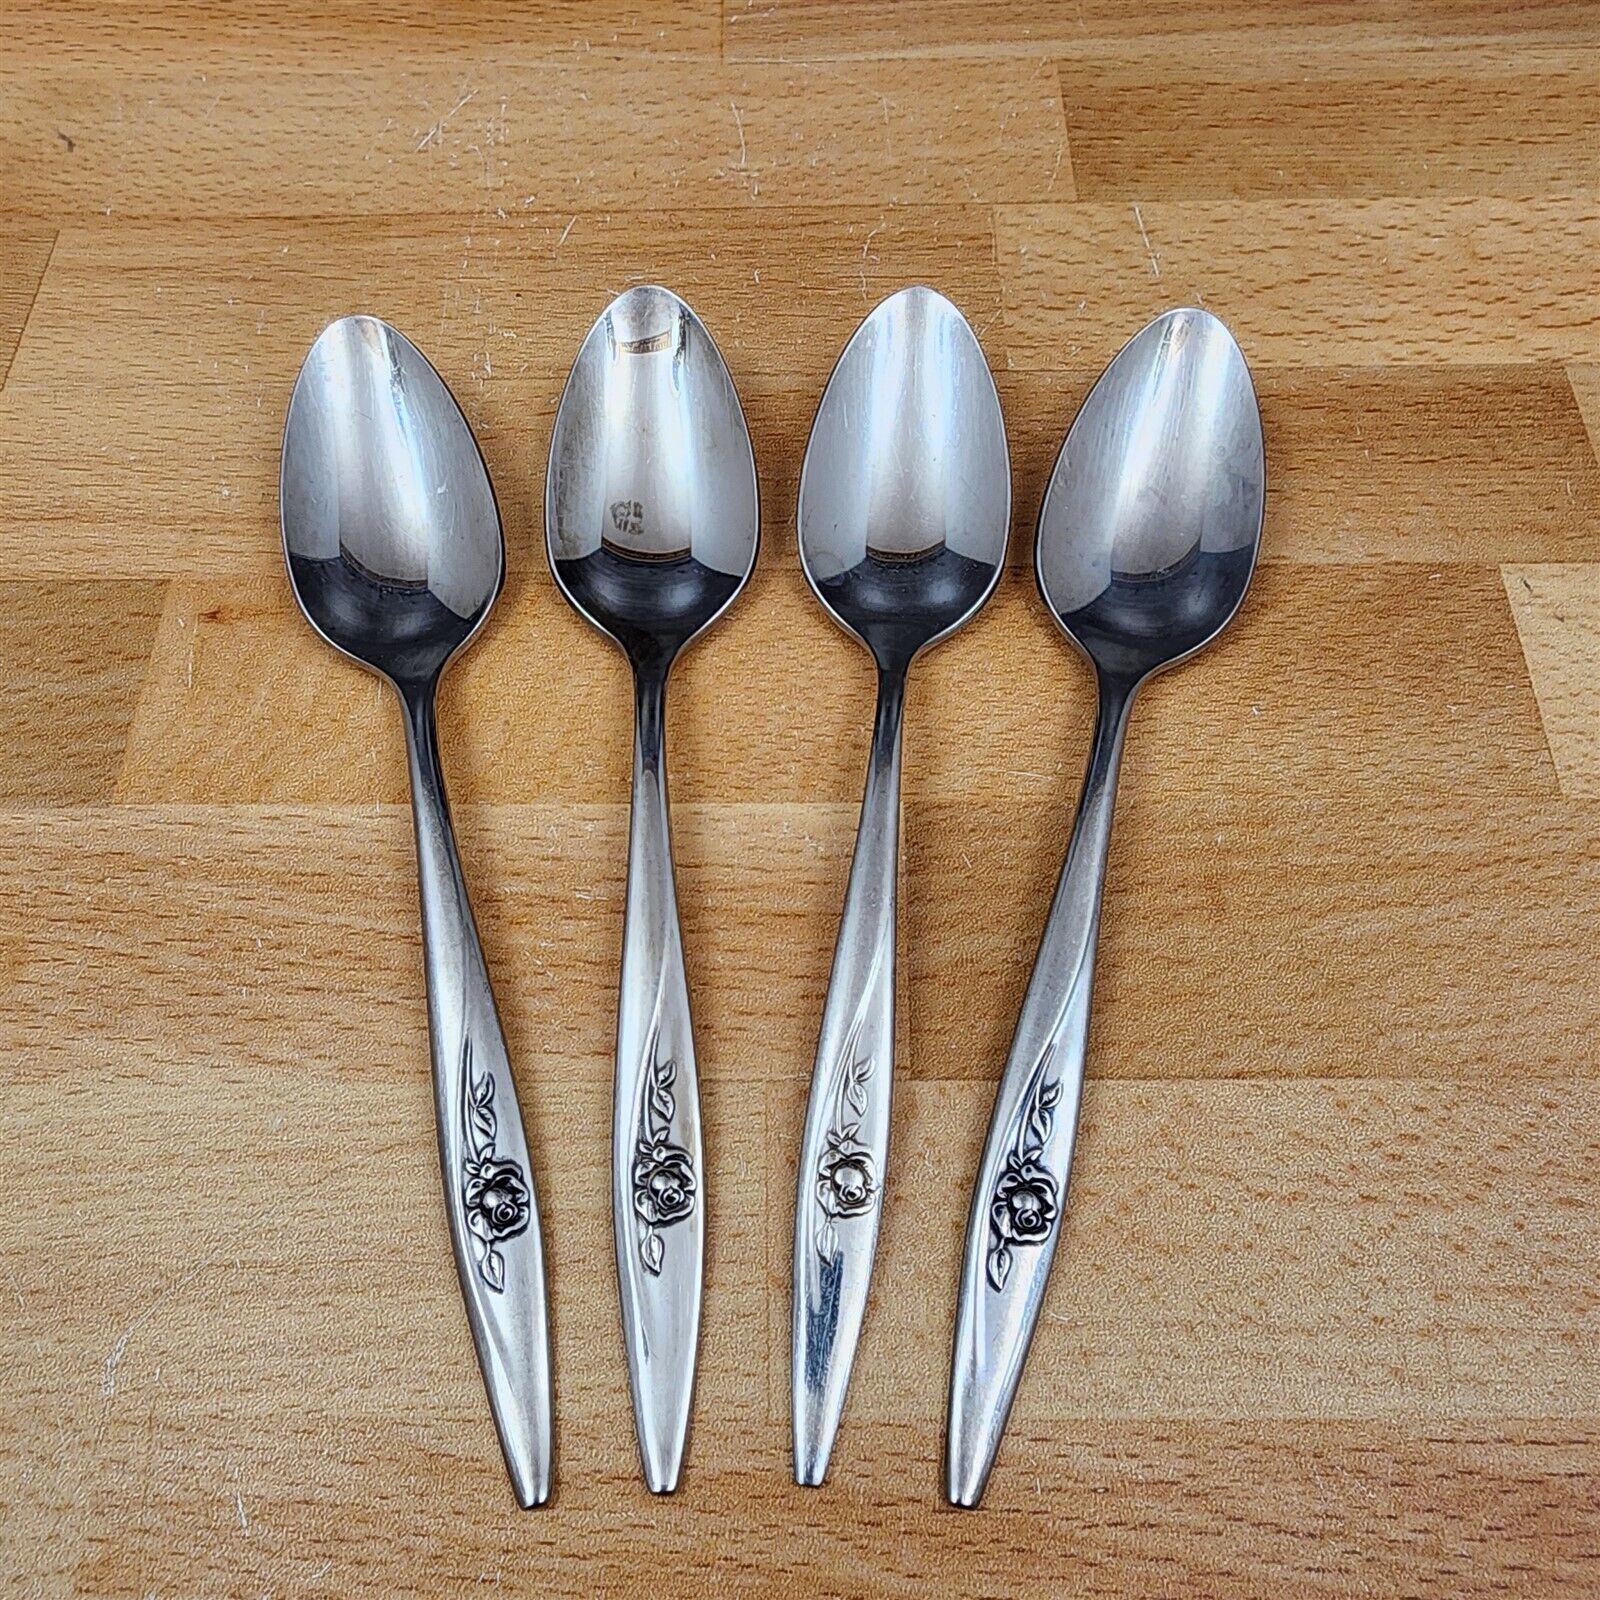 Primary image for Teaspoon Lasting Rose Stainless Set of 4 by ONEIDA Flatware 6" (15cm)